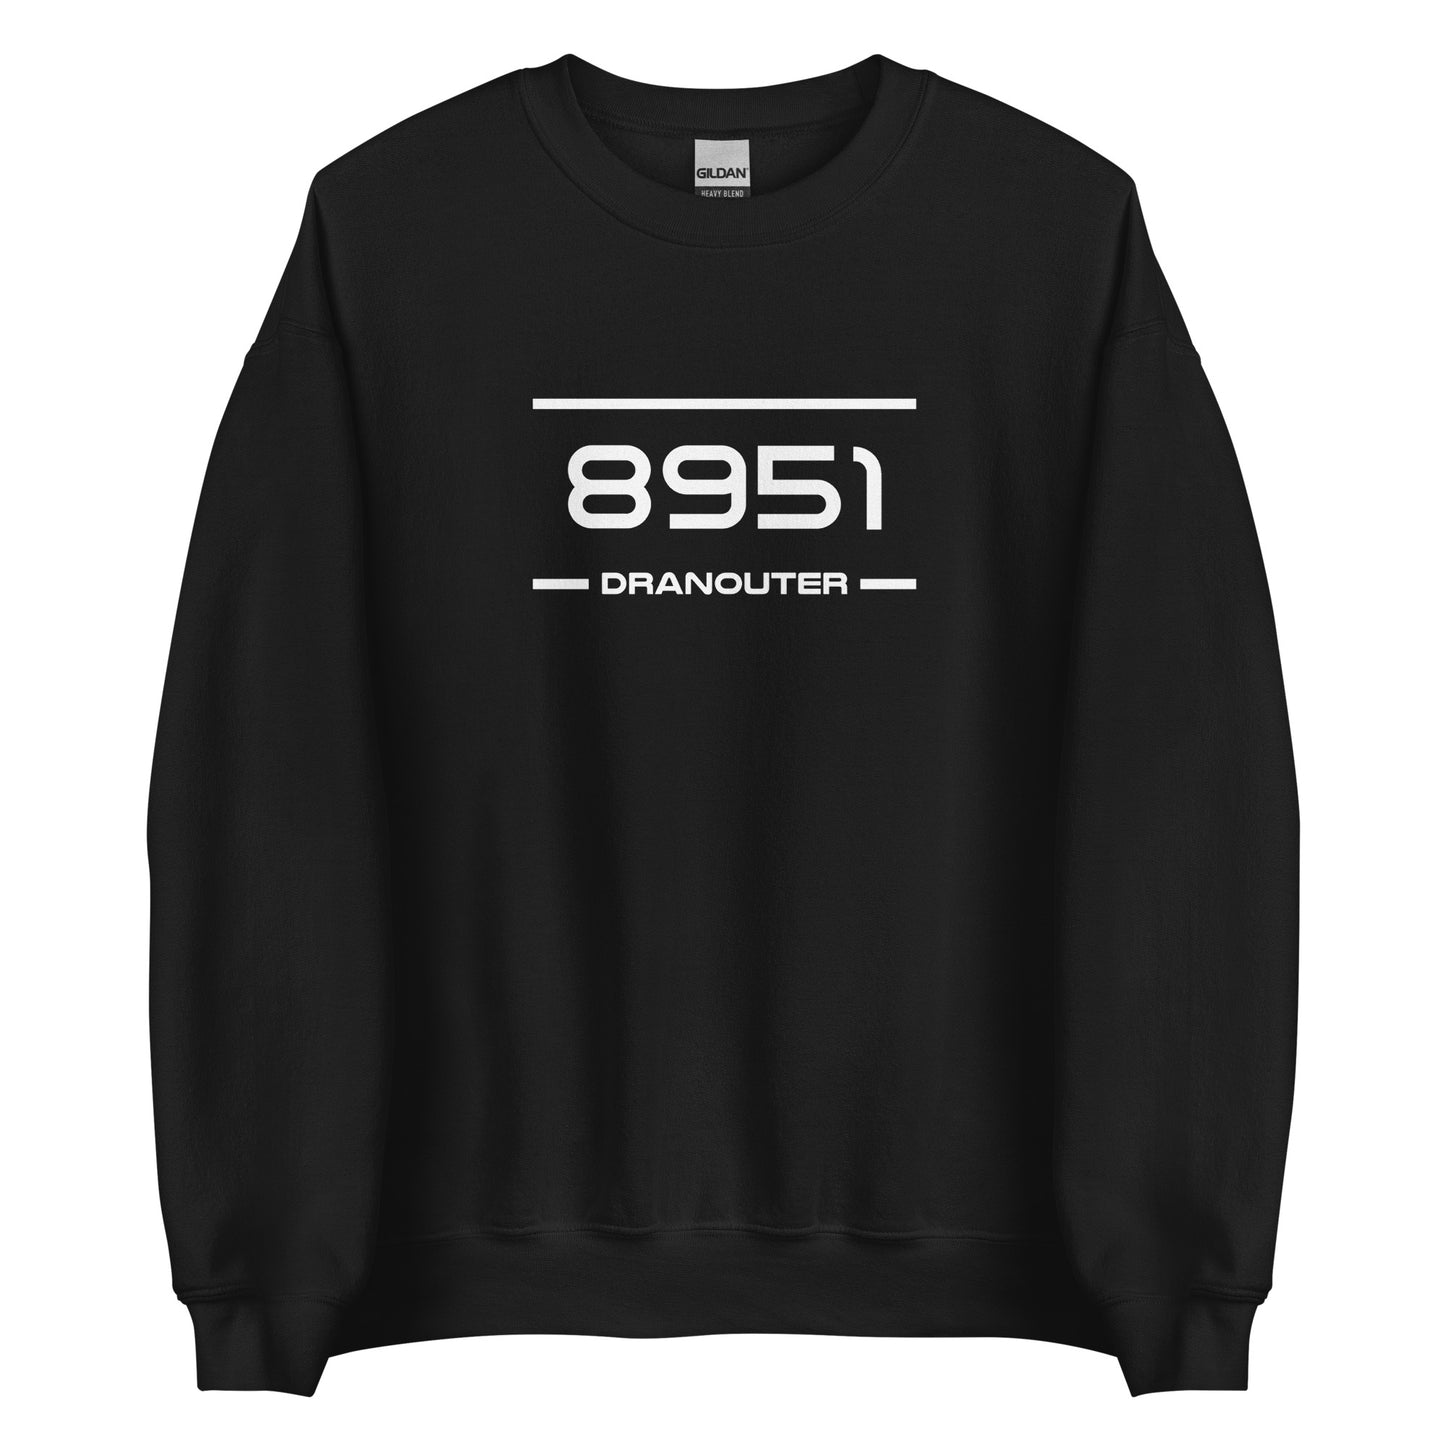 Sweater - 8951 - Dranouter (M/V)